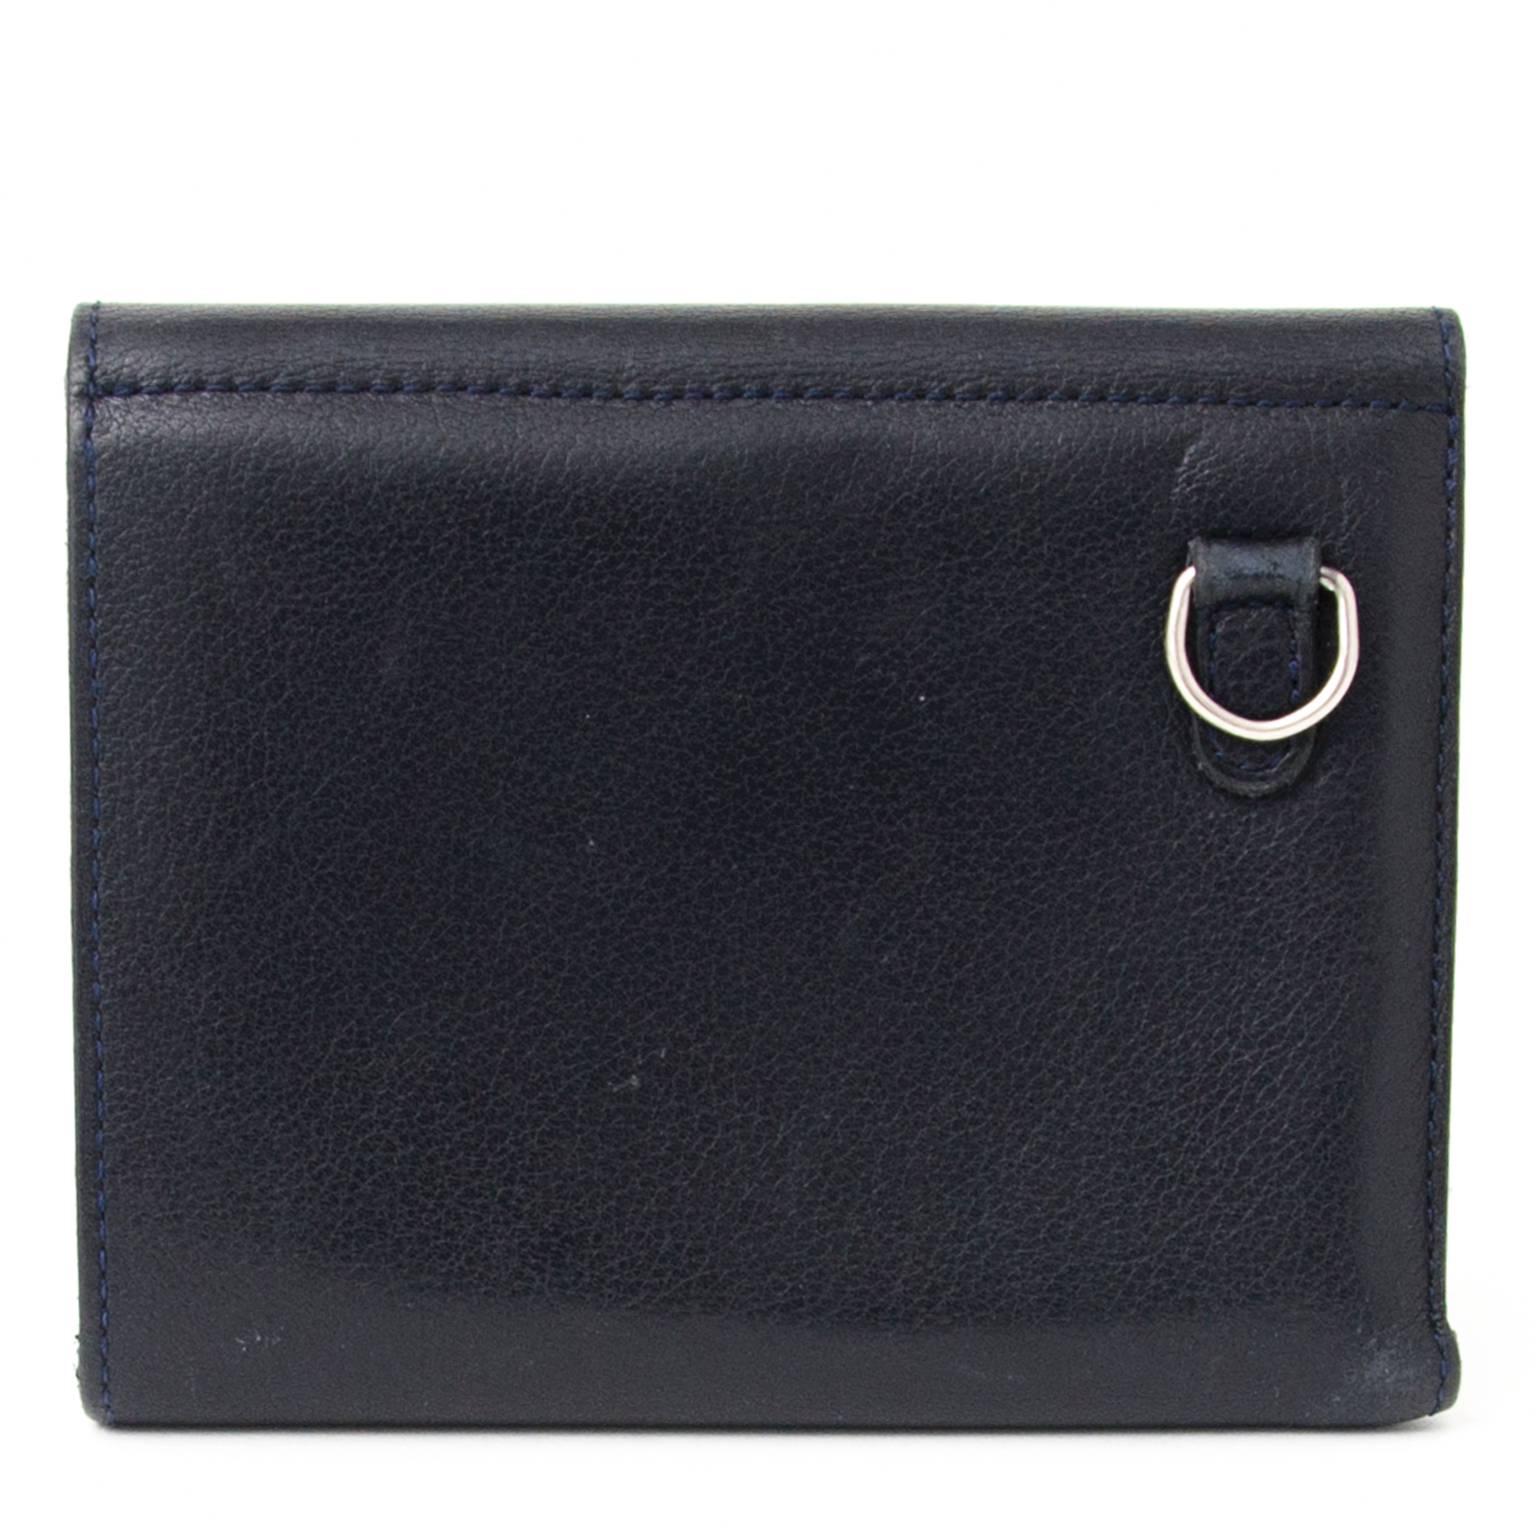 Outside is made out of leather, interior features a leather lining. 

One large compartments of which 4 for creditcards. One smaller compartment for change and coins. 

The wallet closes with a press button. 
